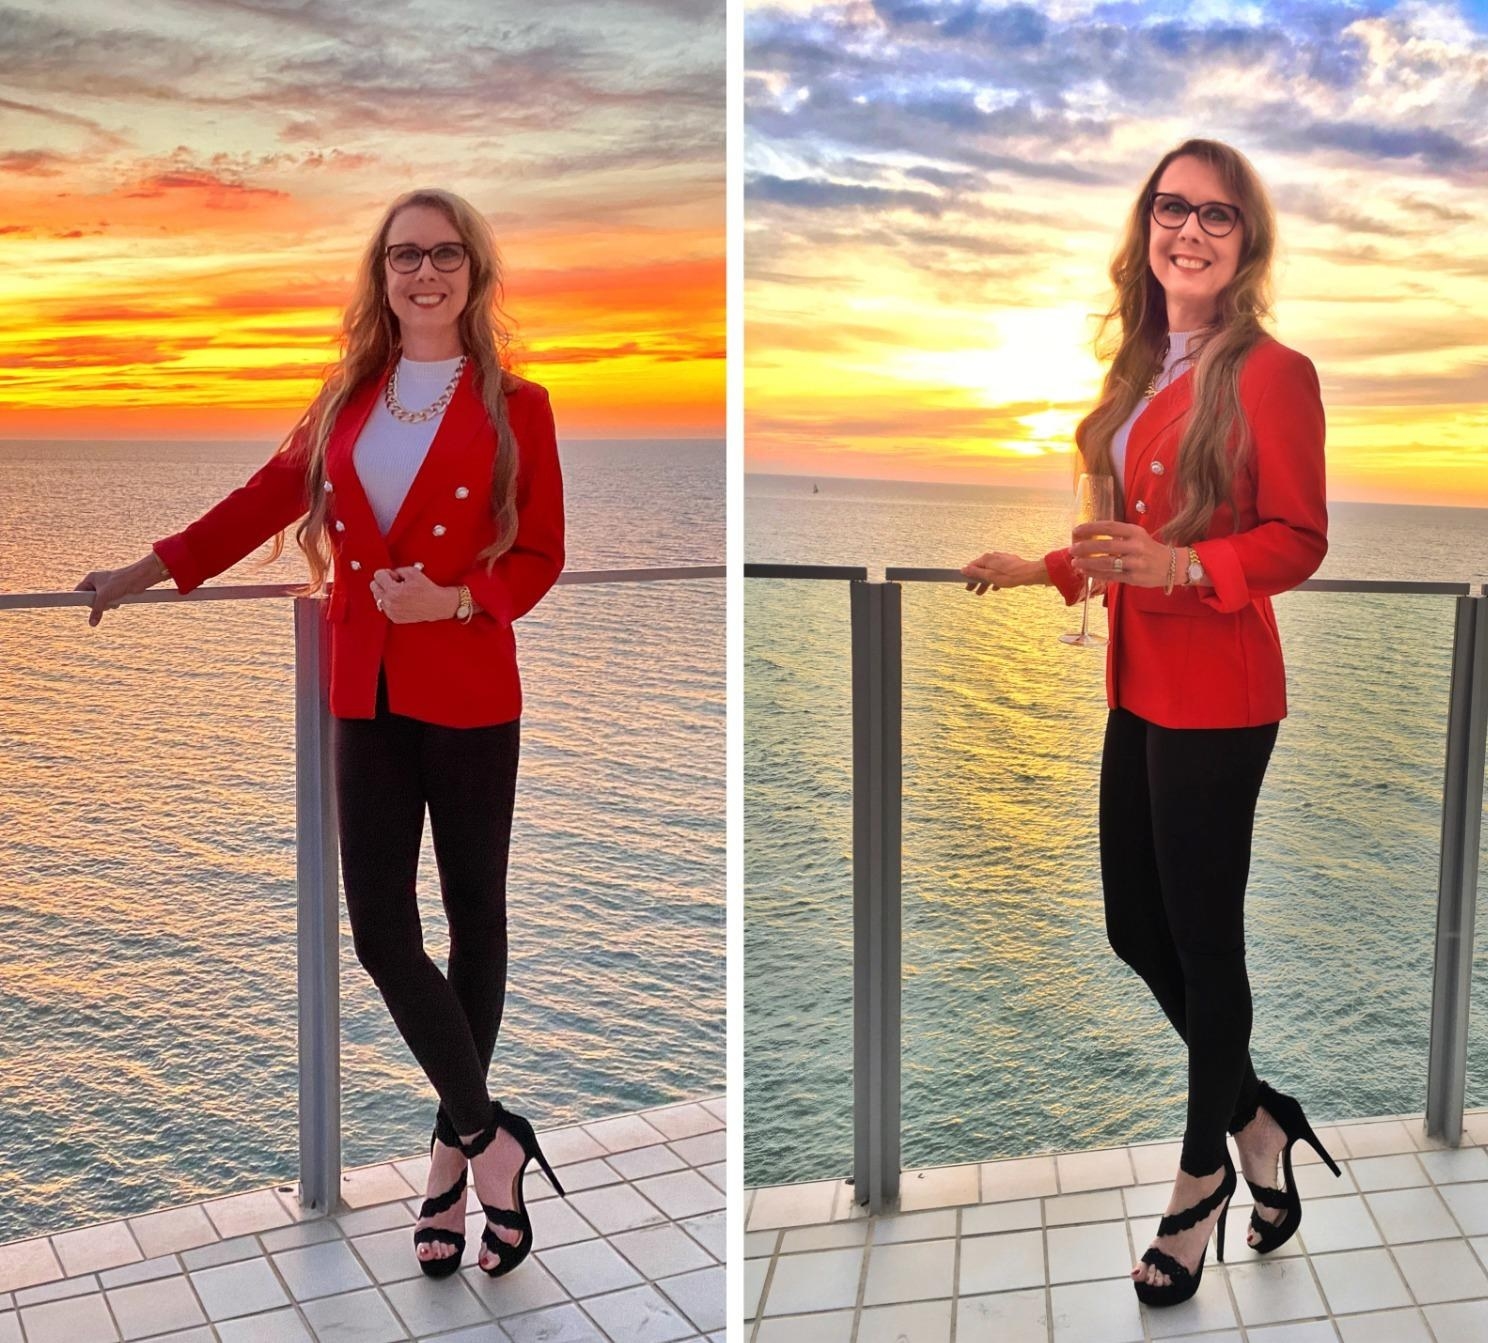 There are two photos of the reviewer wearing the heels and standing outside during the sunset